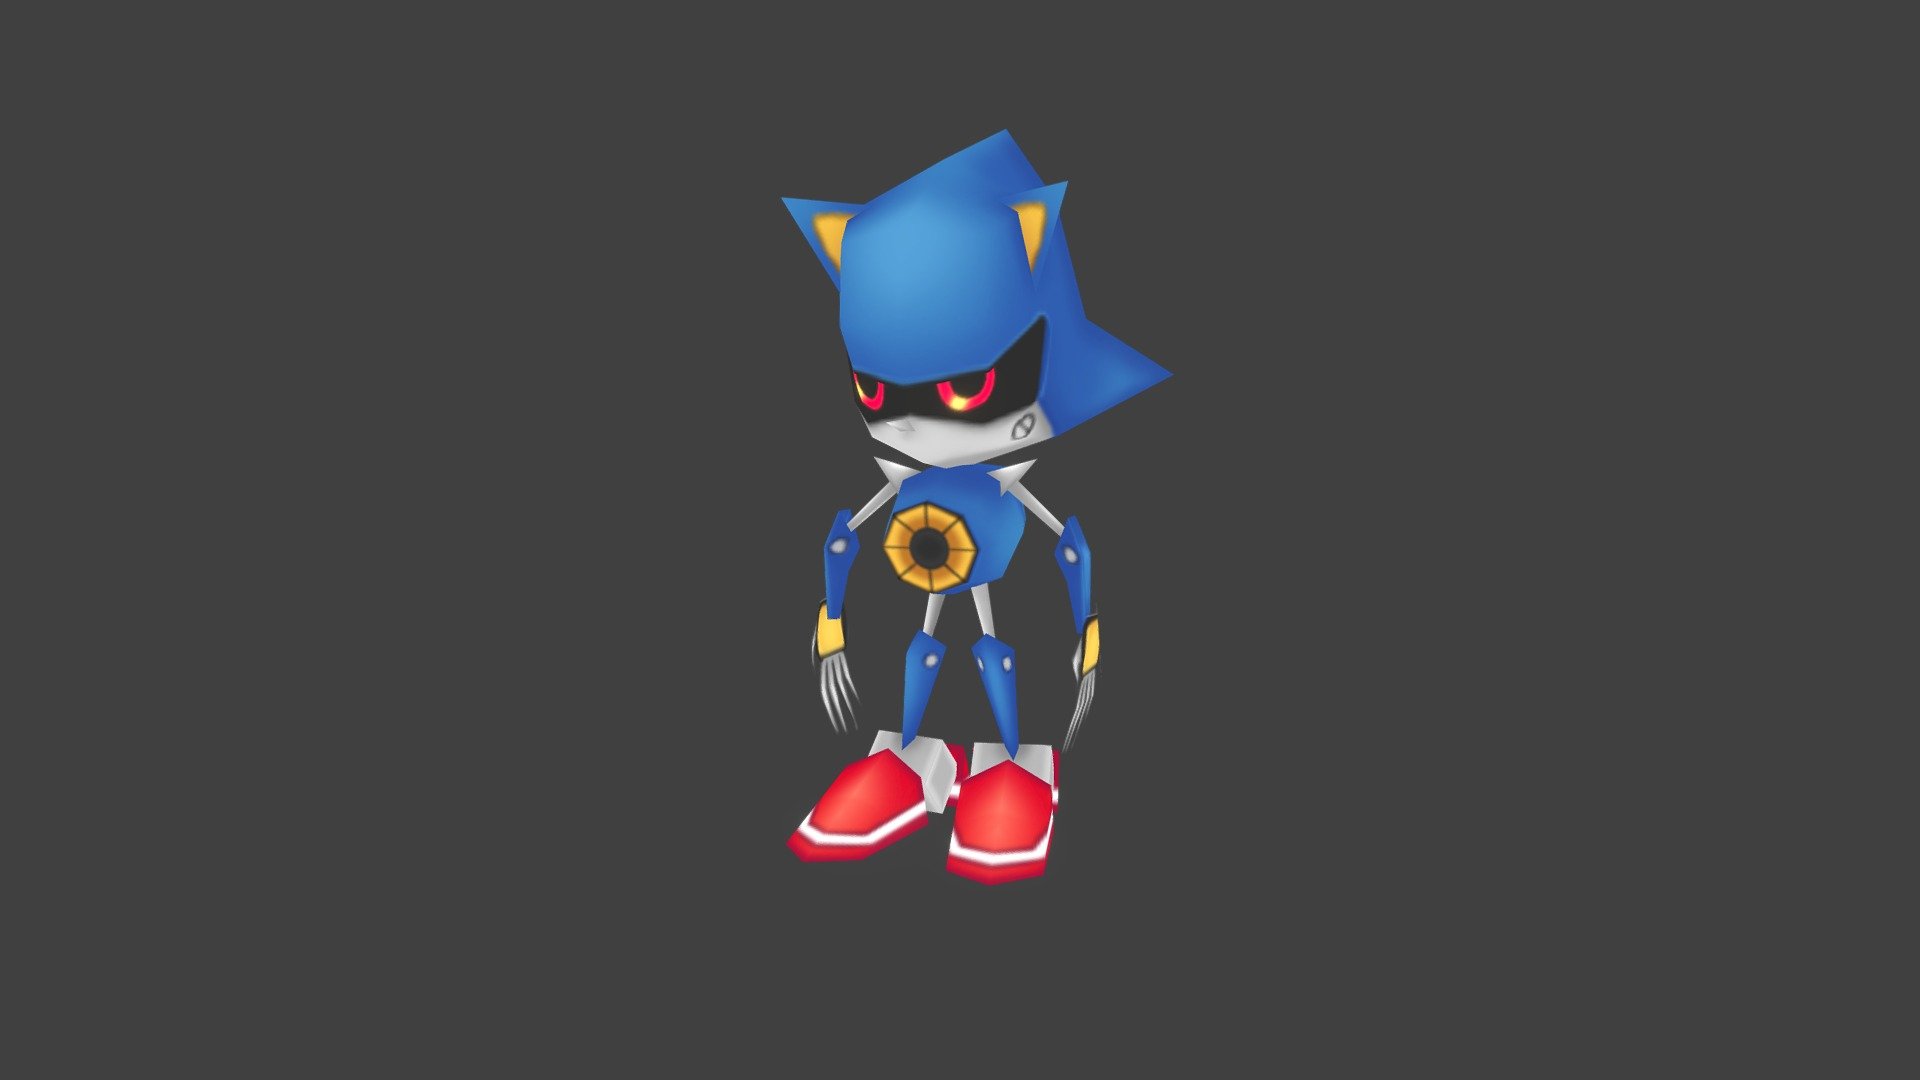 Metal sonic low poly with 256tris and 256x256 texture

its part of community fun challenge #256fes

to download this model  and other models support me on ko-fi and become a membership :

https://ko-fi.com/post/Metal-Sonic-lowpoly-256Tris-for-Download-Fbx-PNG-Z8Z1AHDIH - Metal Sonic low poly 256tris - Buy Royalty Free 3D model by KloWorks 3d model